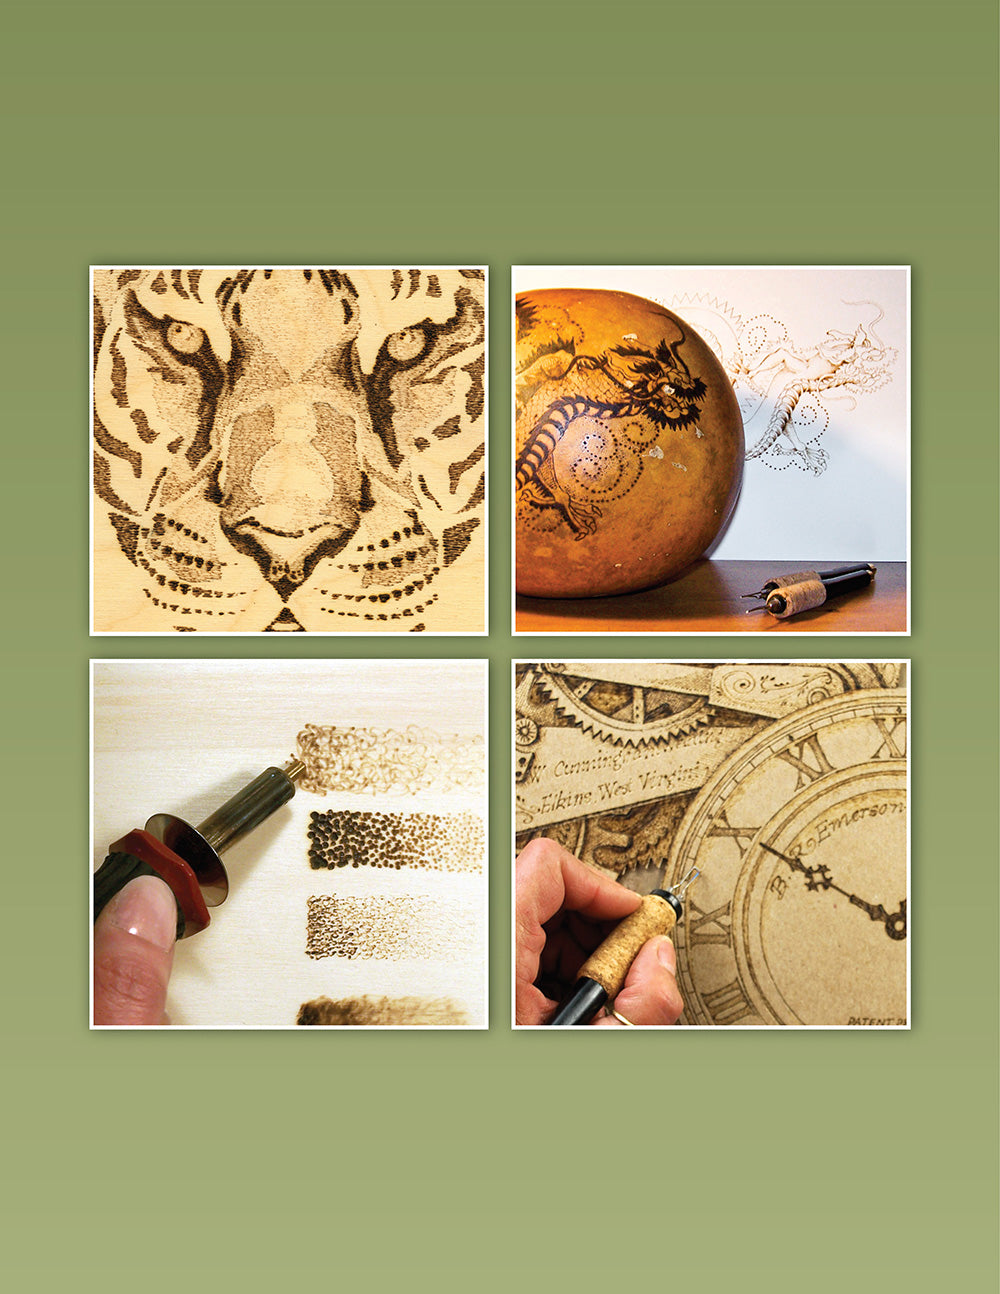 The Art & Craft of Pyrography